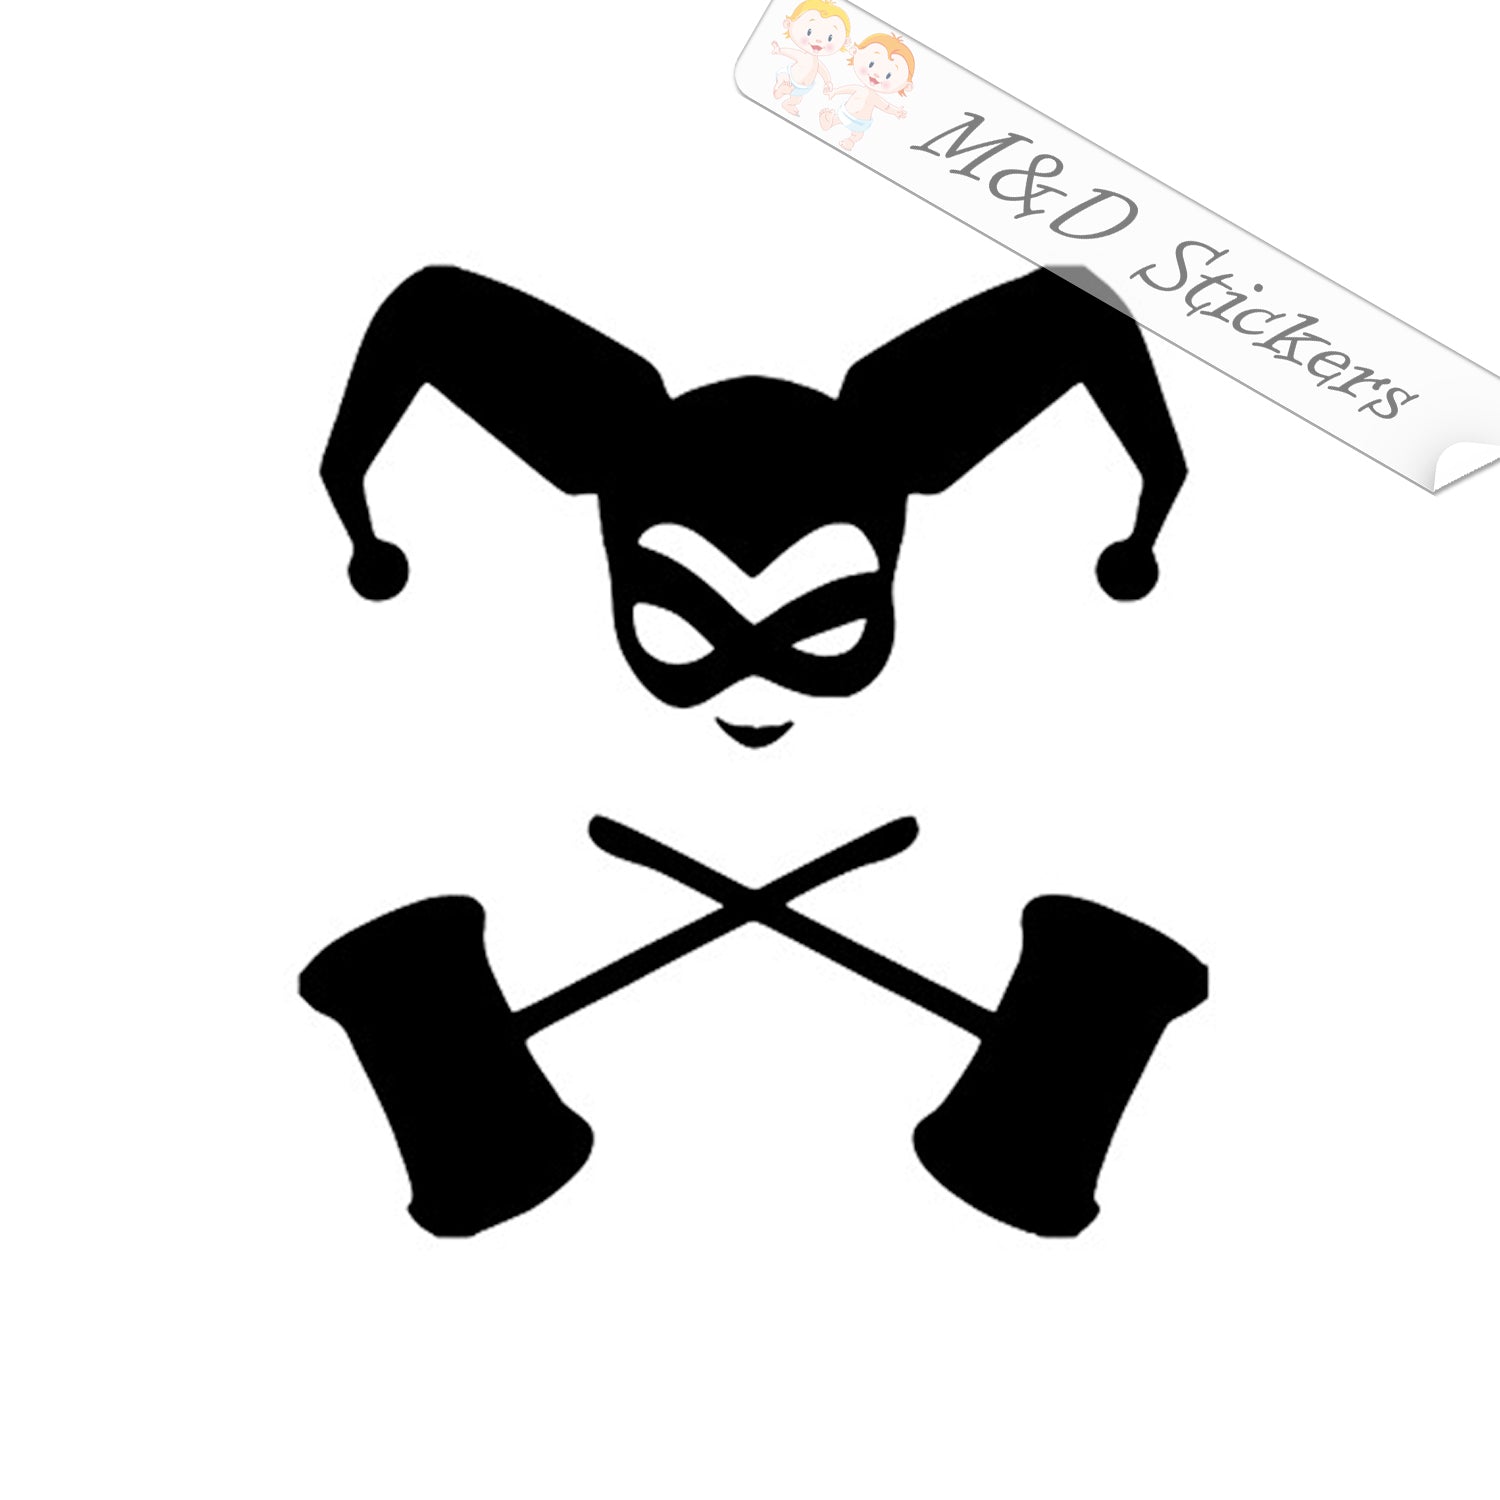 Harley Quinn (4.5" - 30") Vinyl Decal in Different colors & for C – M&D Stickers